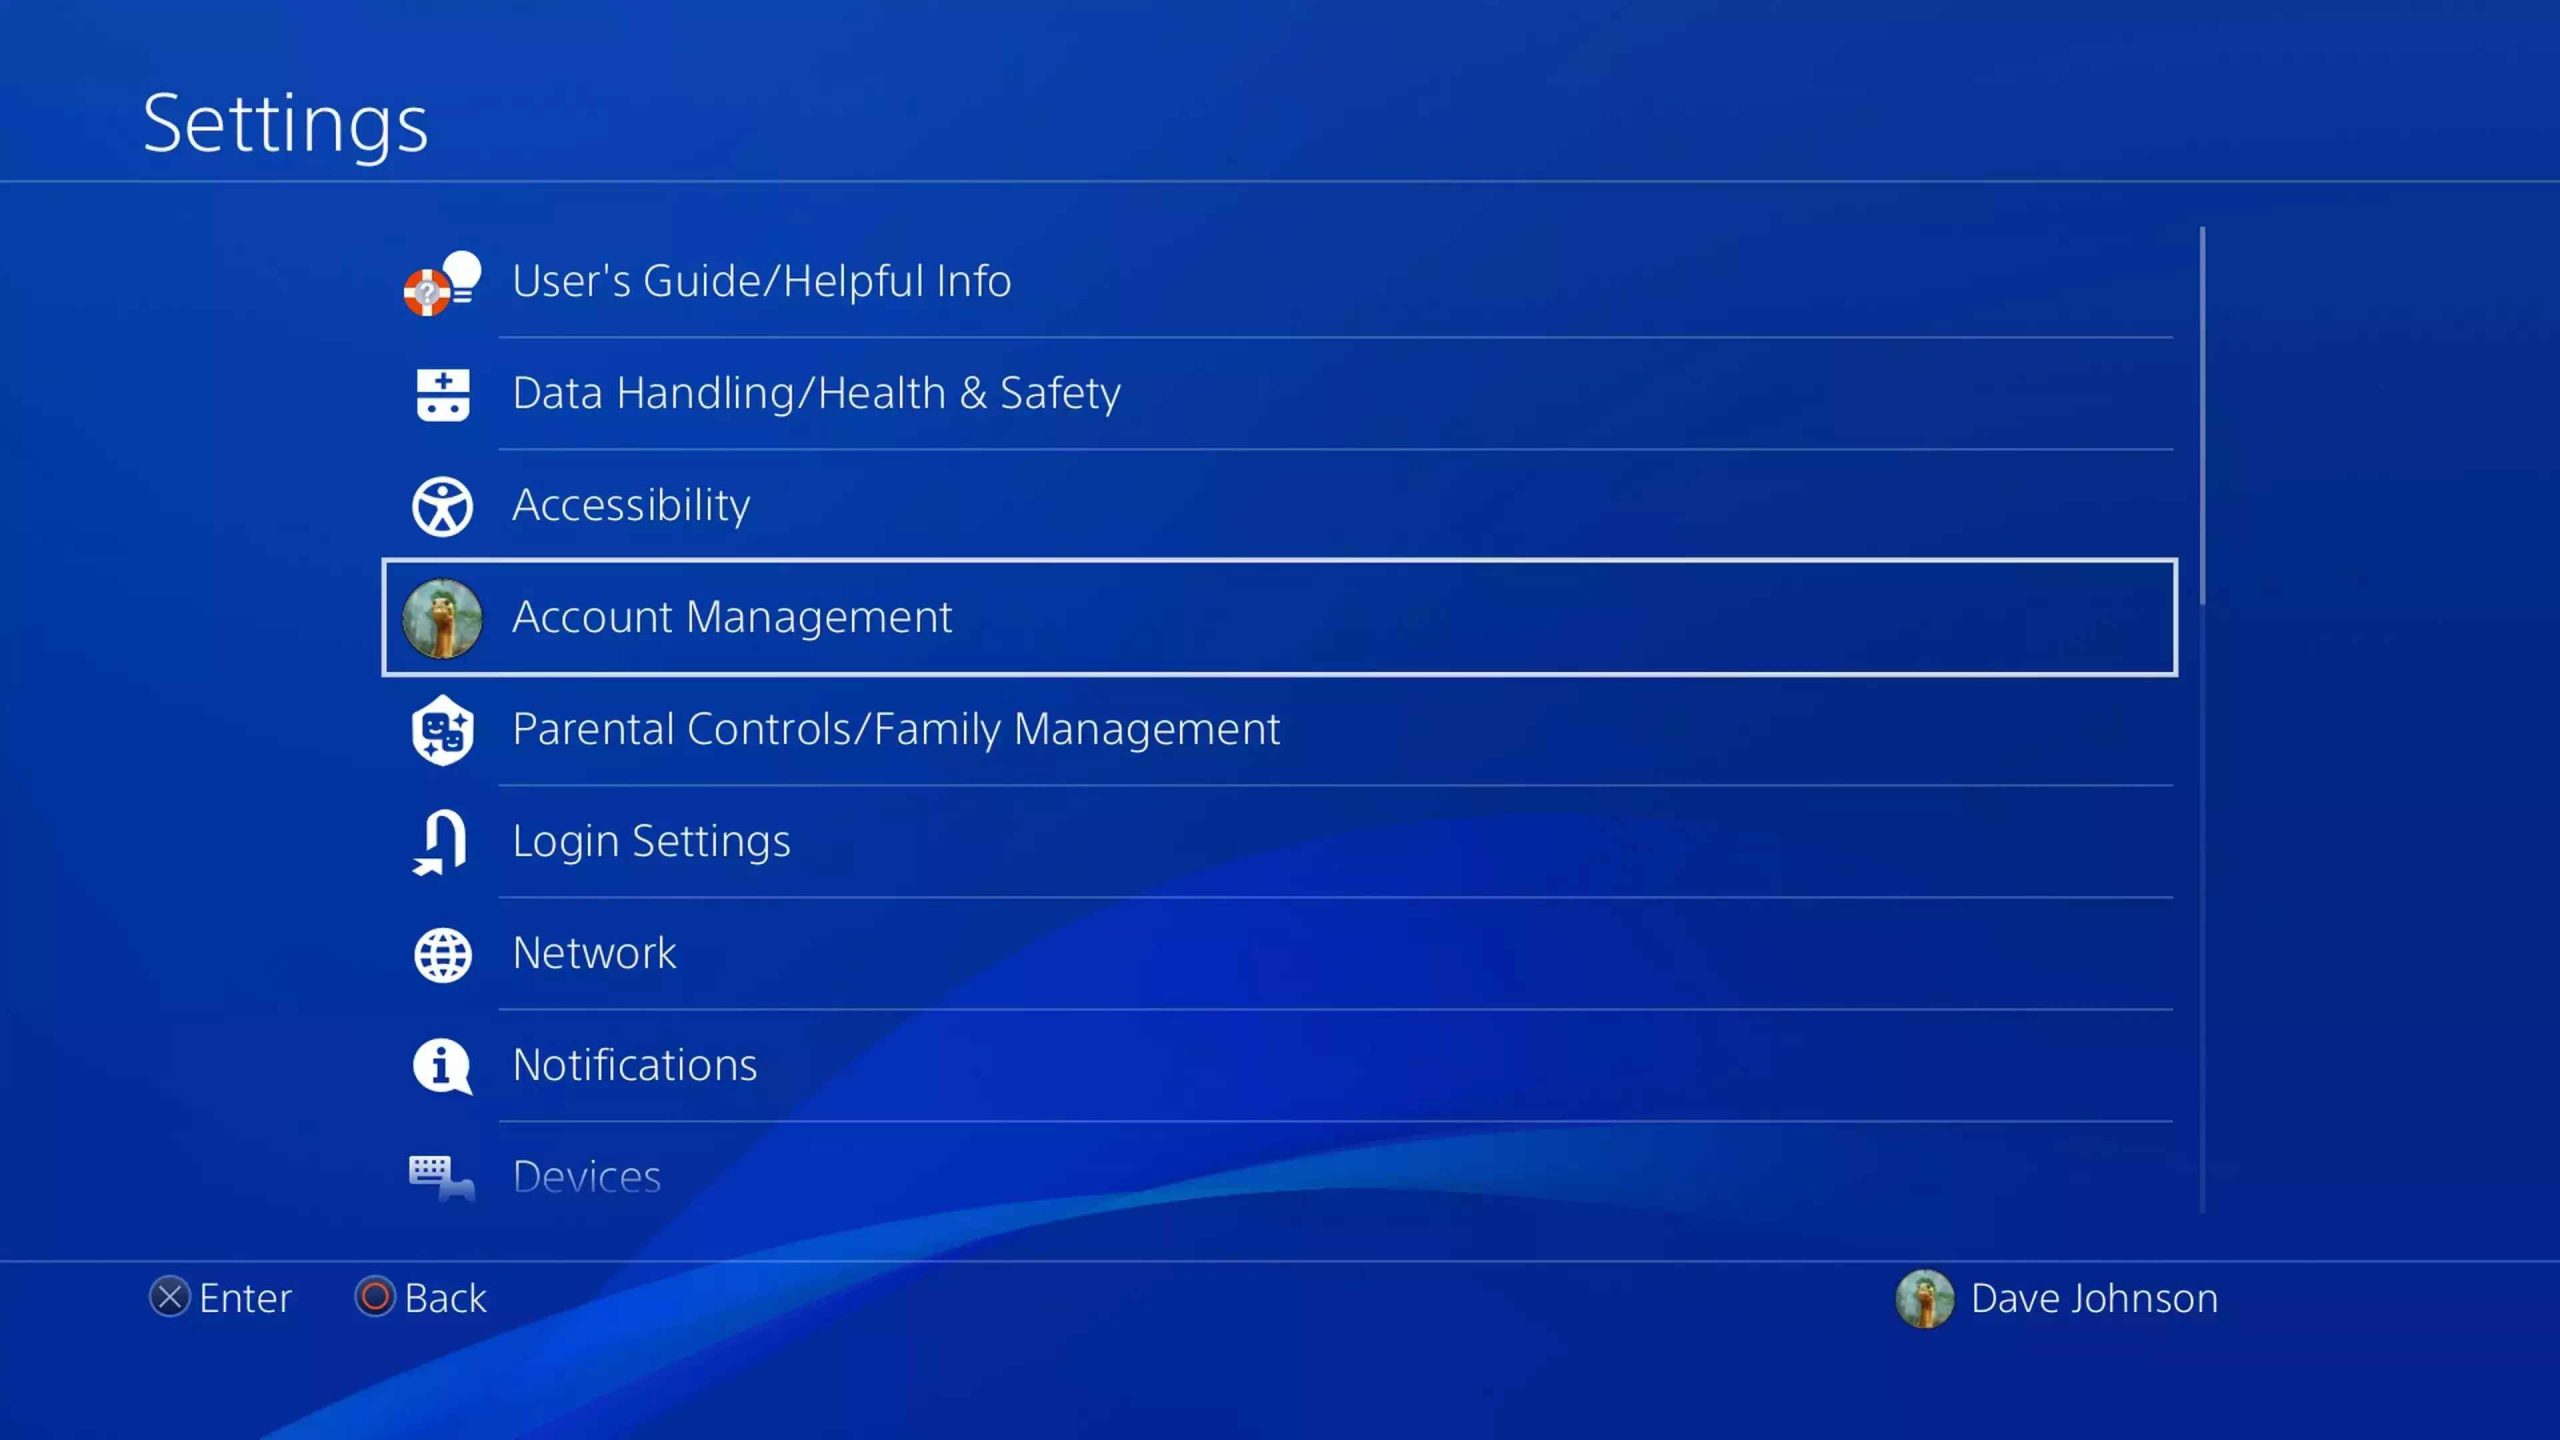 select account management to change PS4 password